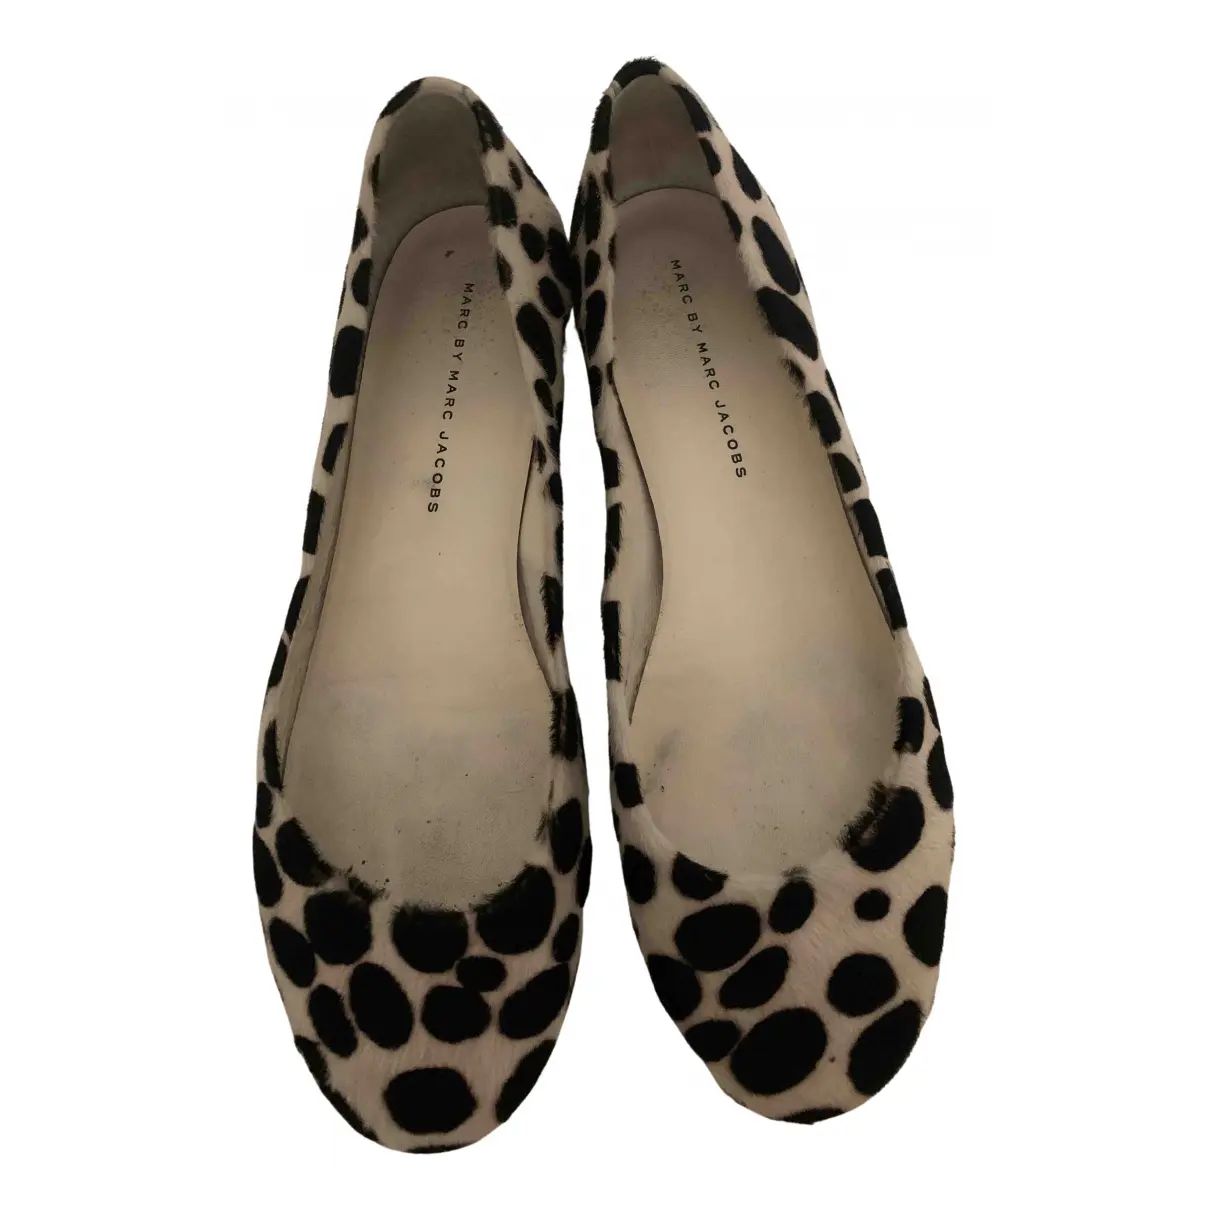 Pony-style calfskin ballet flats Marc by Marc Jacobs